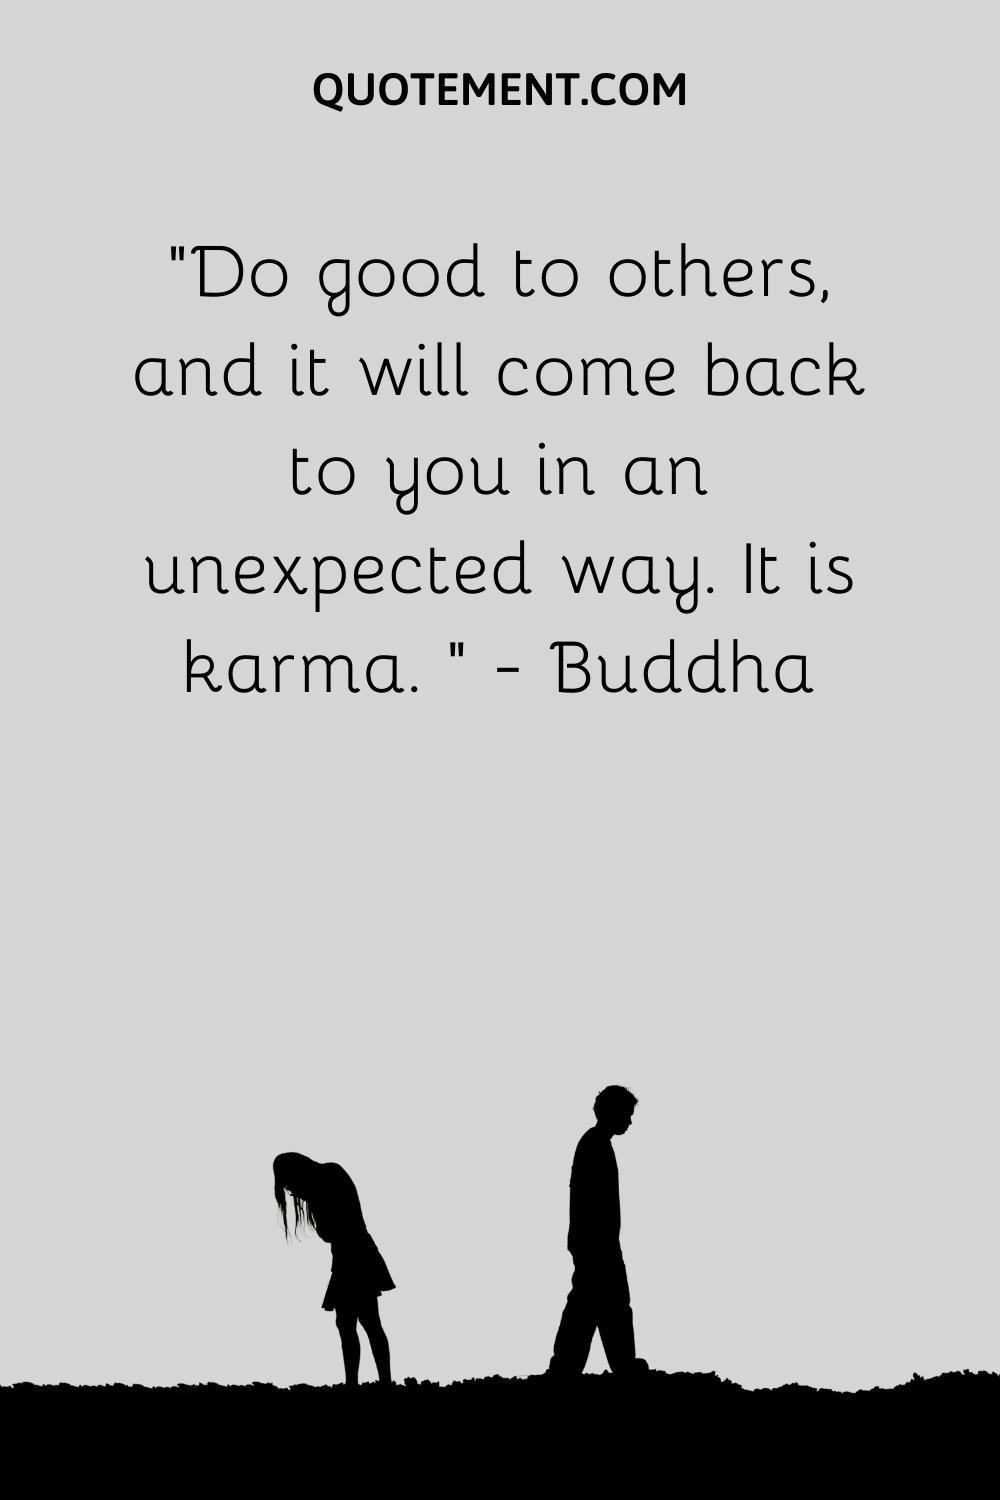 Do good to others, and it will come back to you in an unexpected way